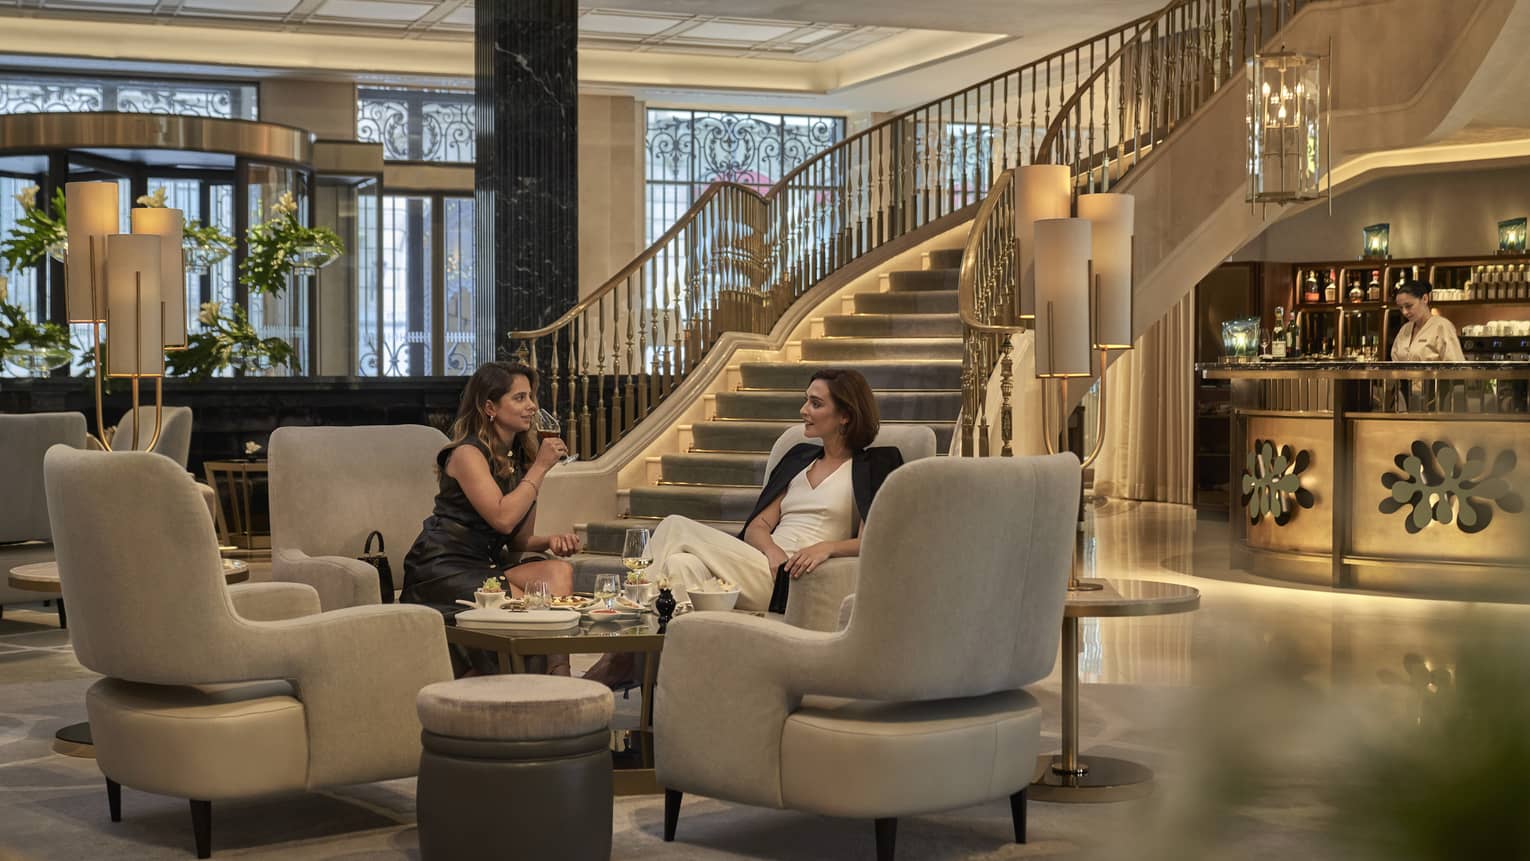 Two guests sitting in a hotel lobby vignette beside a grand staircase